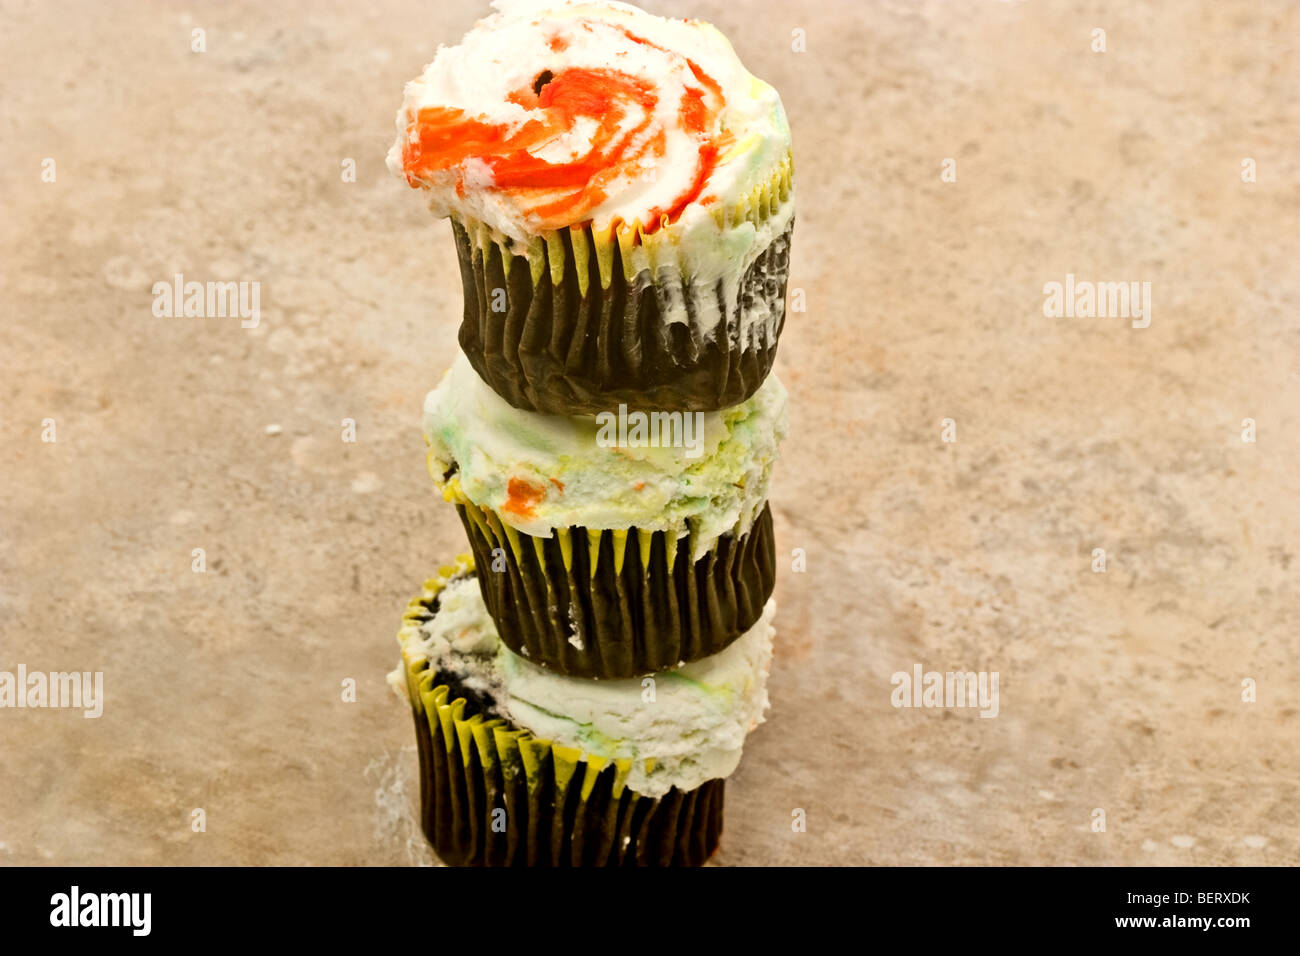 Pile of three chocolate cupcakes covered with icing Stock Photo